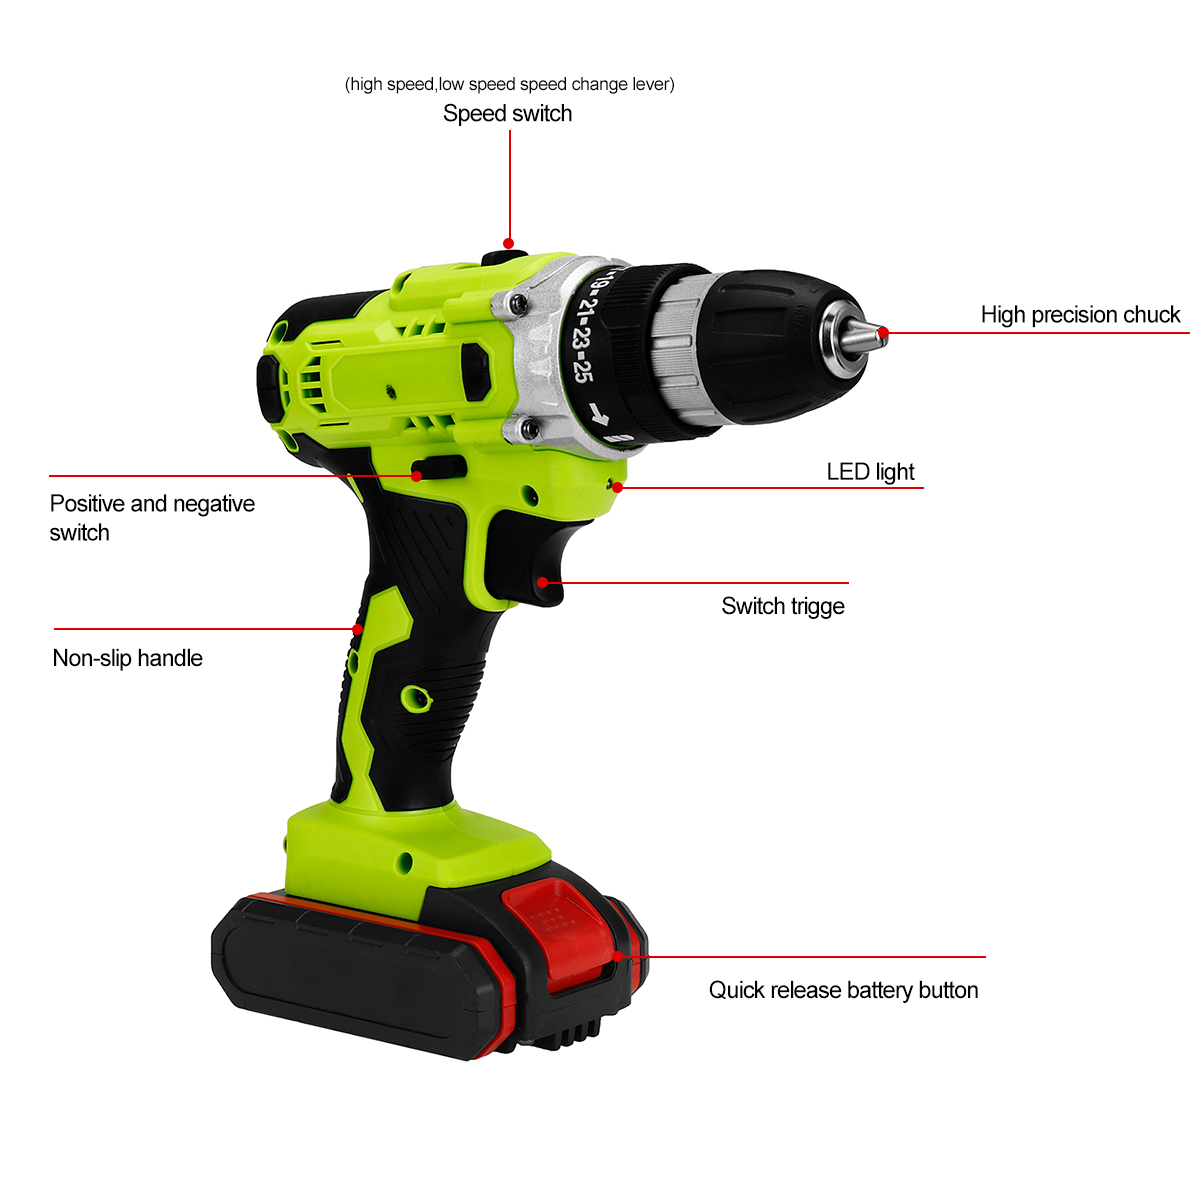 21V-Cordless-Impact-Drill-Set-3-IN-1-Electric-Torque-Wrench-Screwdriver-Drill-W-1-Or-2-Battery-Comes-1837421-13